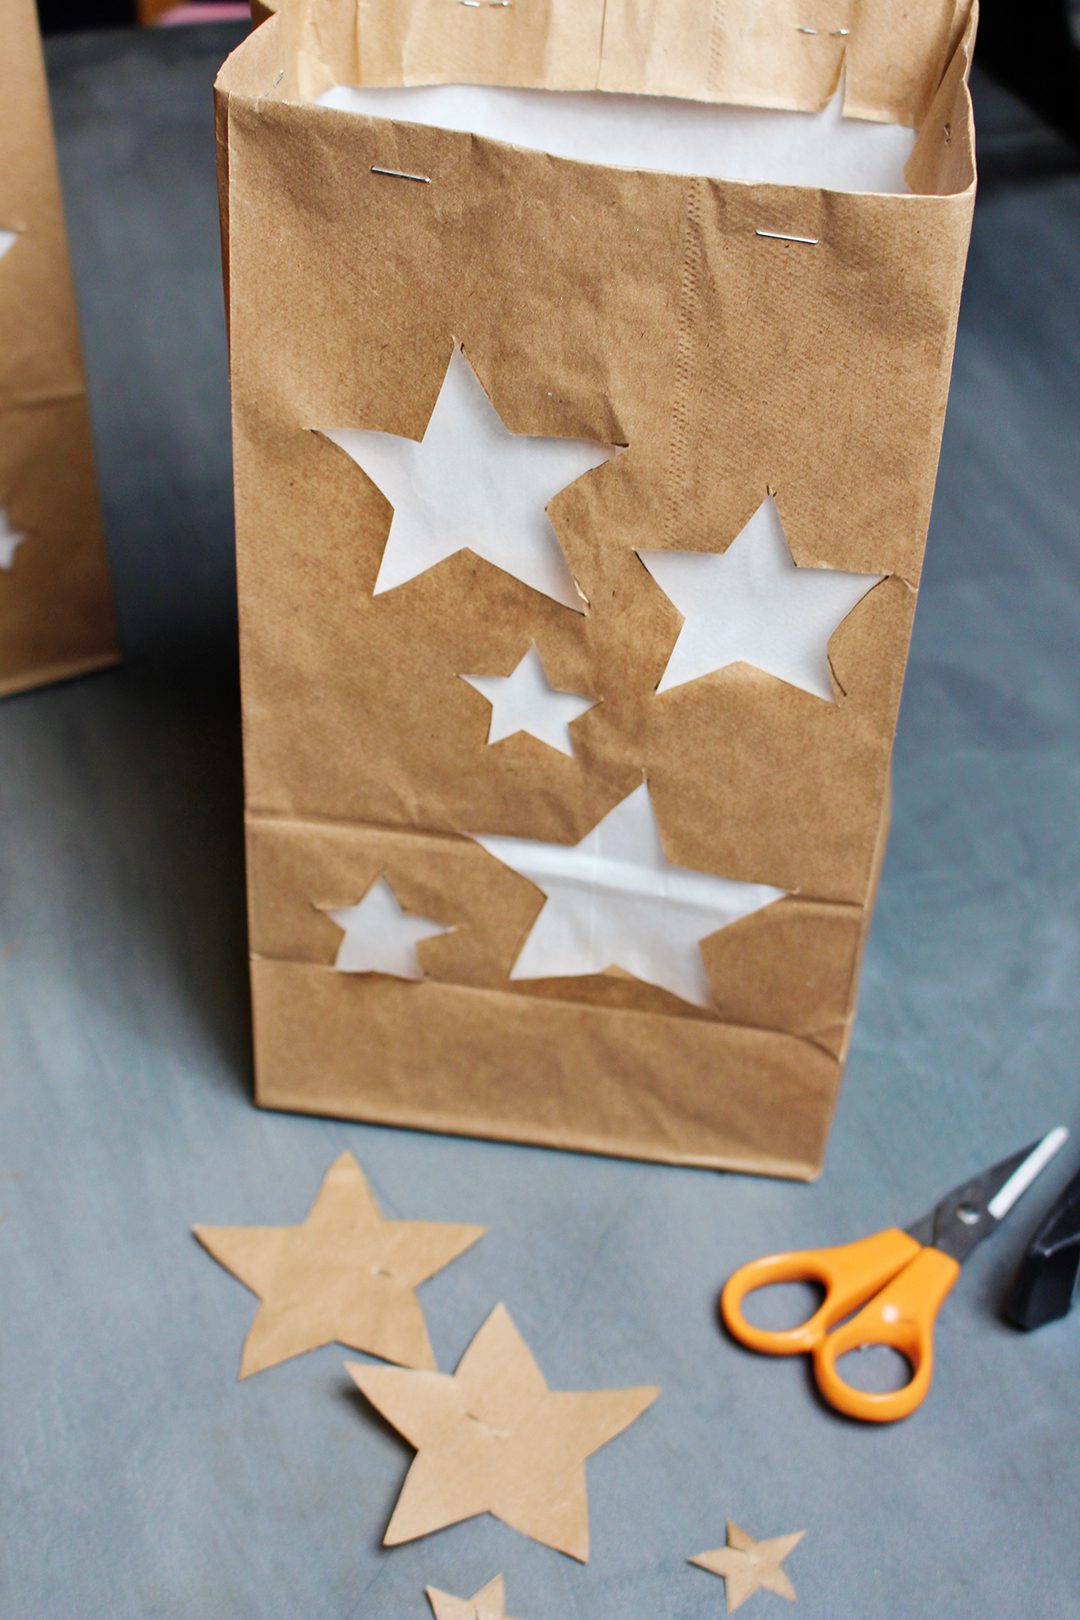 A brown paper bag with stars cut out from the front, lined with white paper, near a pari of scissors.